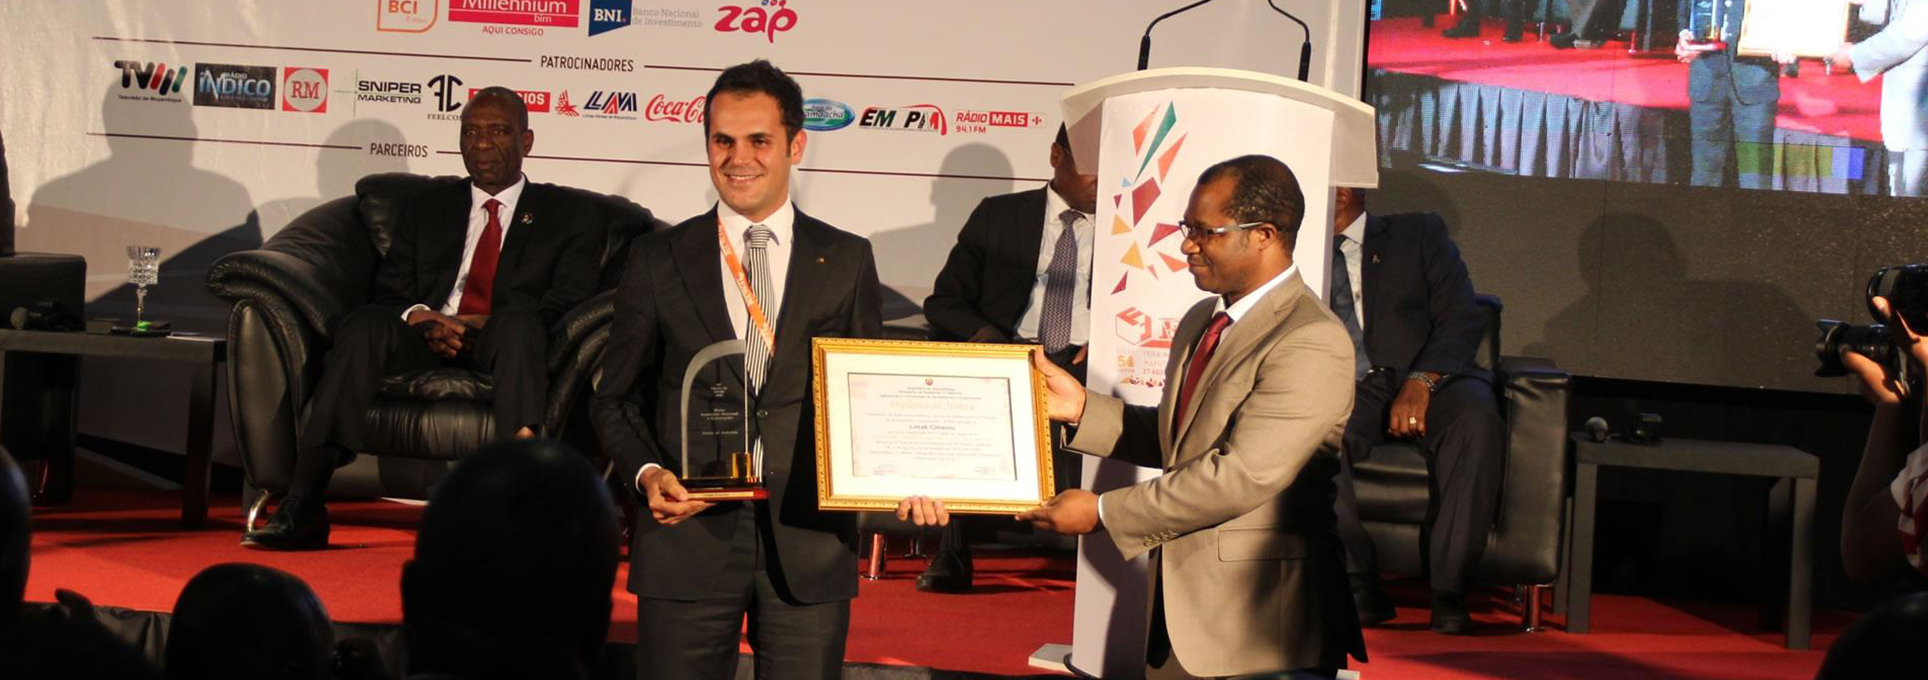 We received the Best Industrial Investment Award in Mozambique